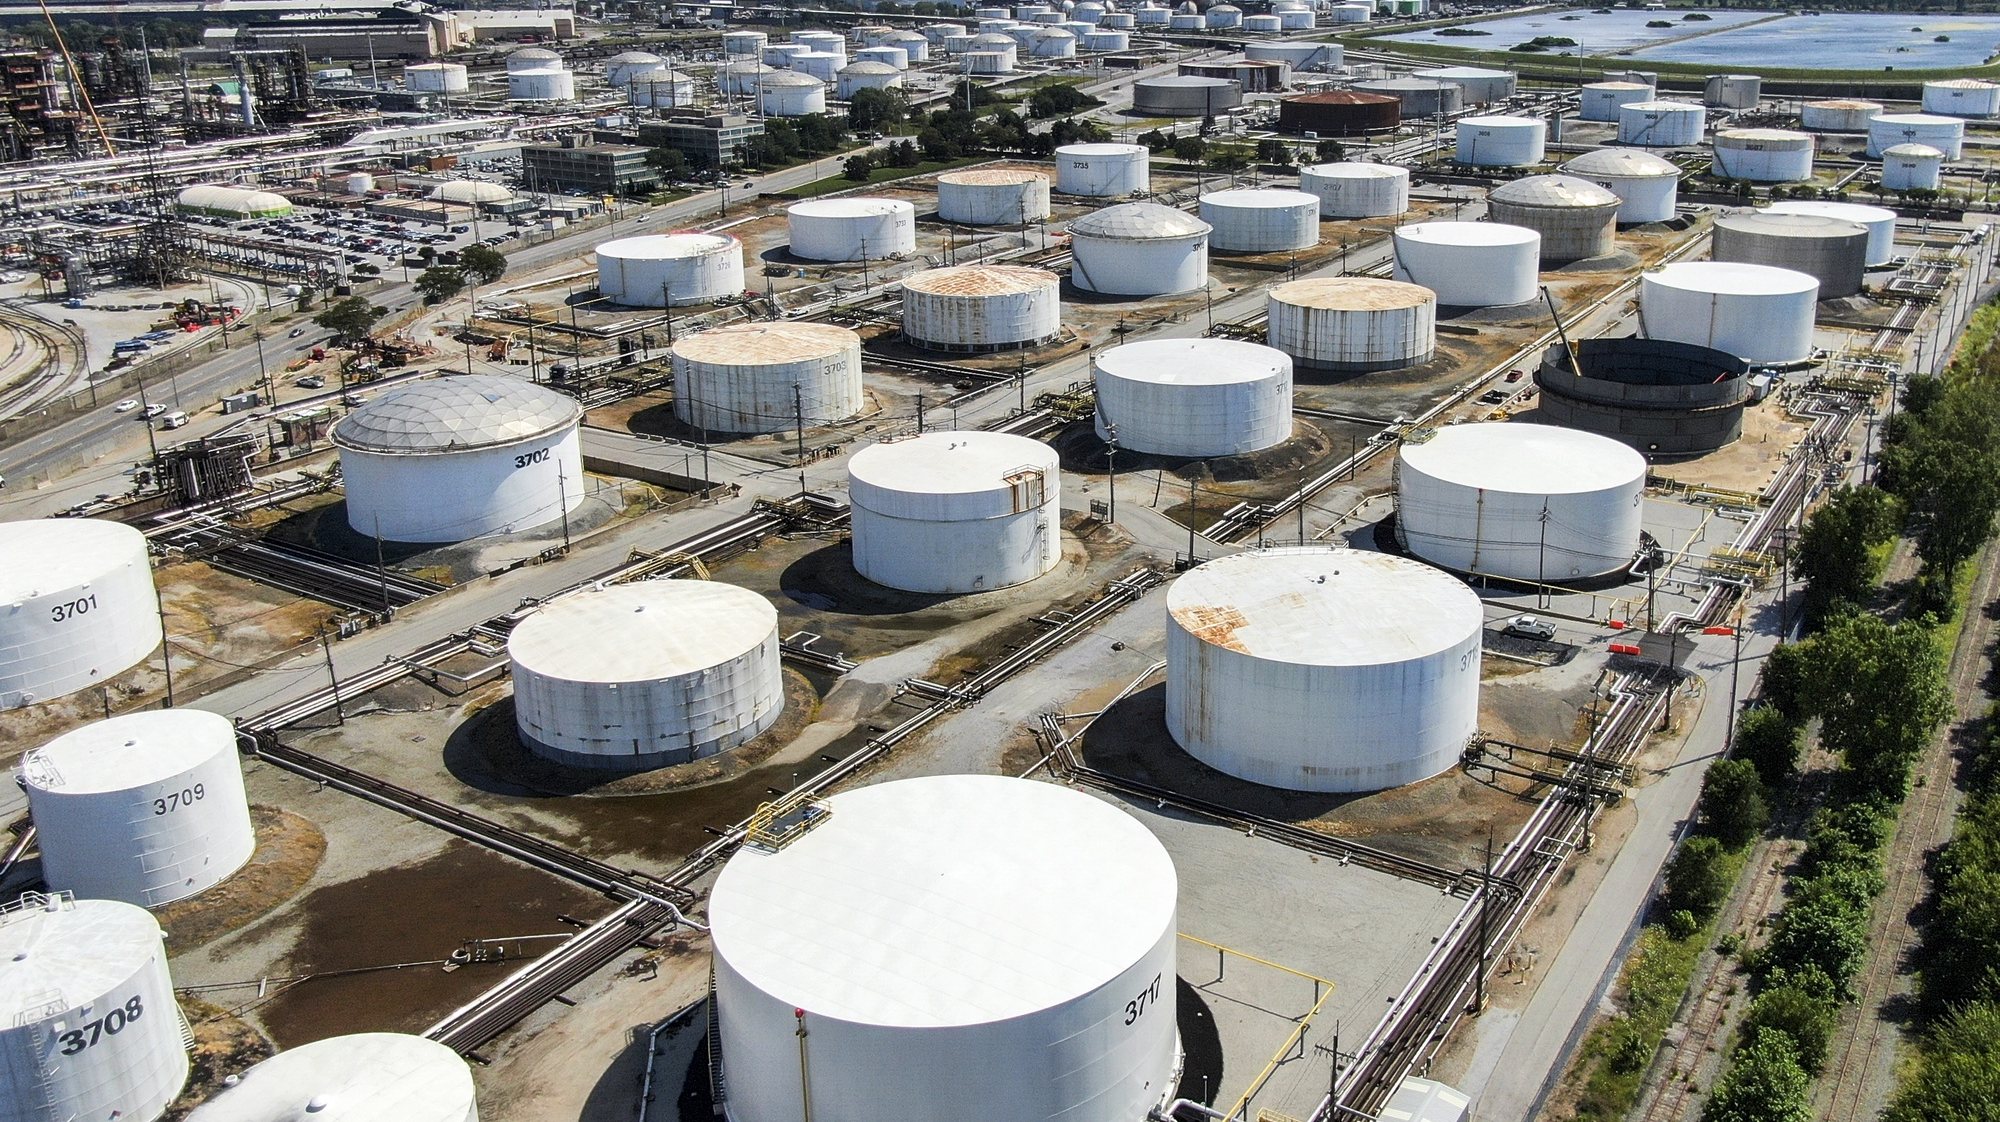 epa07803127 An aerial view taken with a drone shows oil storage tanks at the BP oil refinery in Whiting, Indiana, USA, 29 August 2019. The facility has the capability of handling 400,000 barrels of crude oil per day and it is the sixth largest oil refinery in the USA. Standard Oil of Indiana first established the refinery in 1889.  EPA/TANNEN MAURY